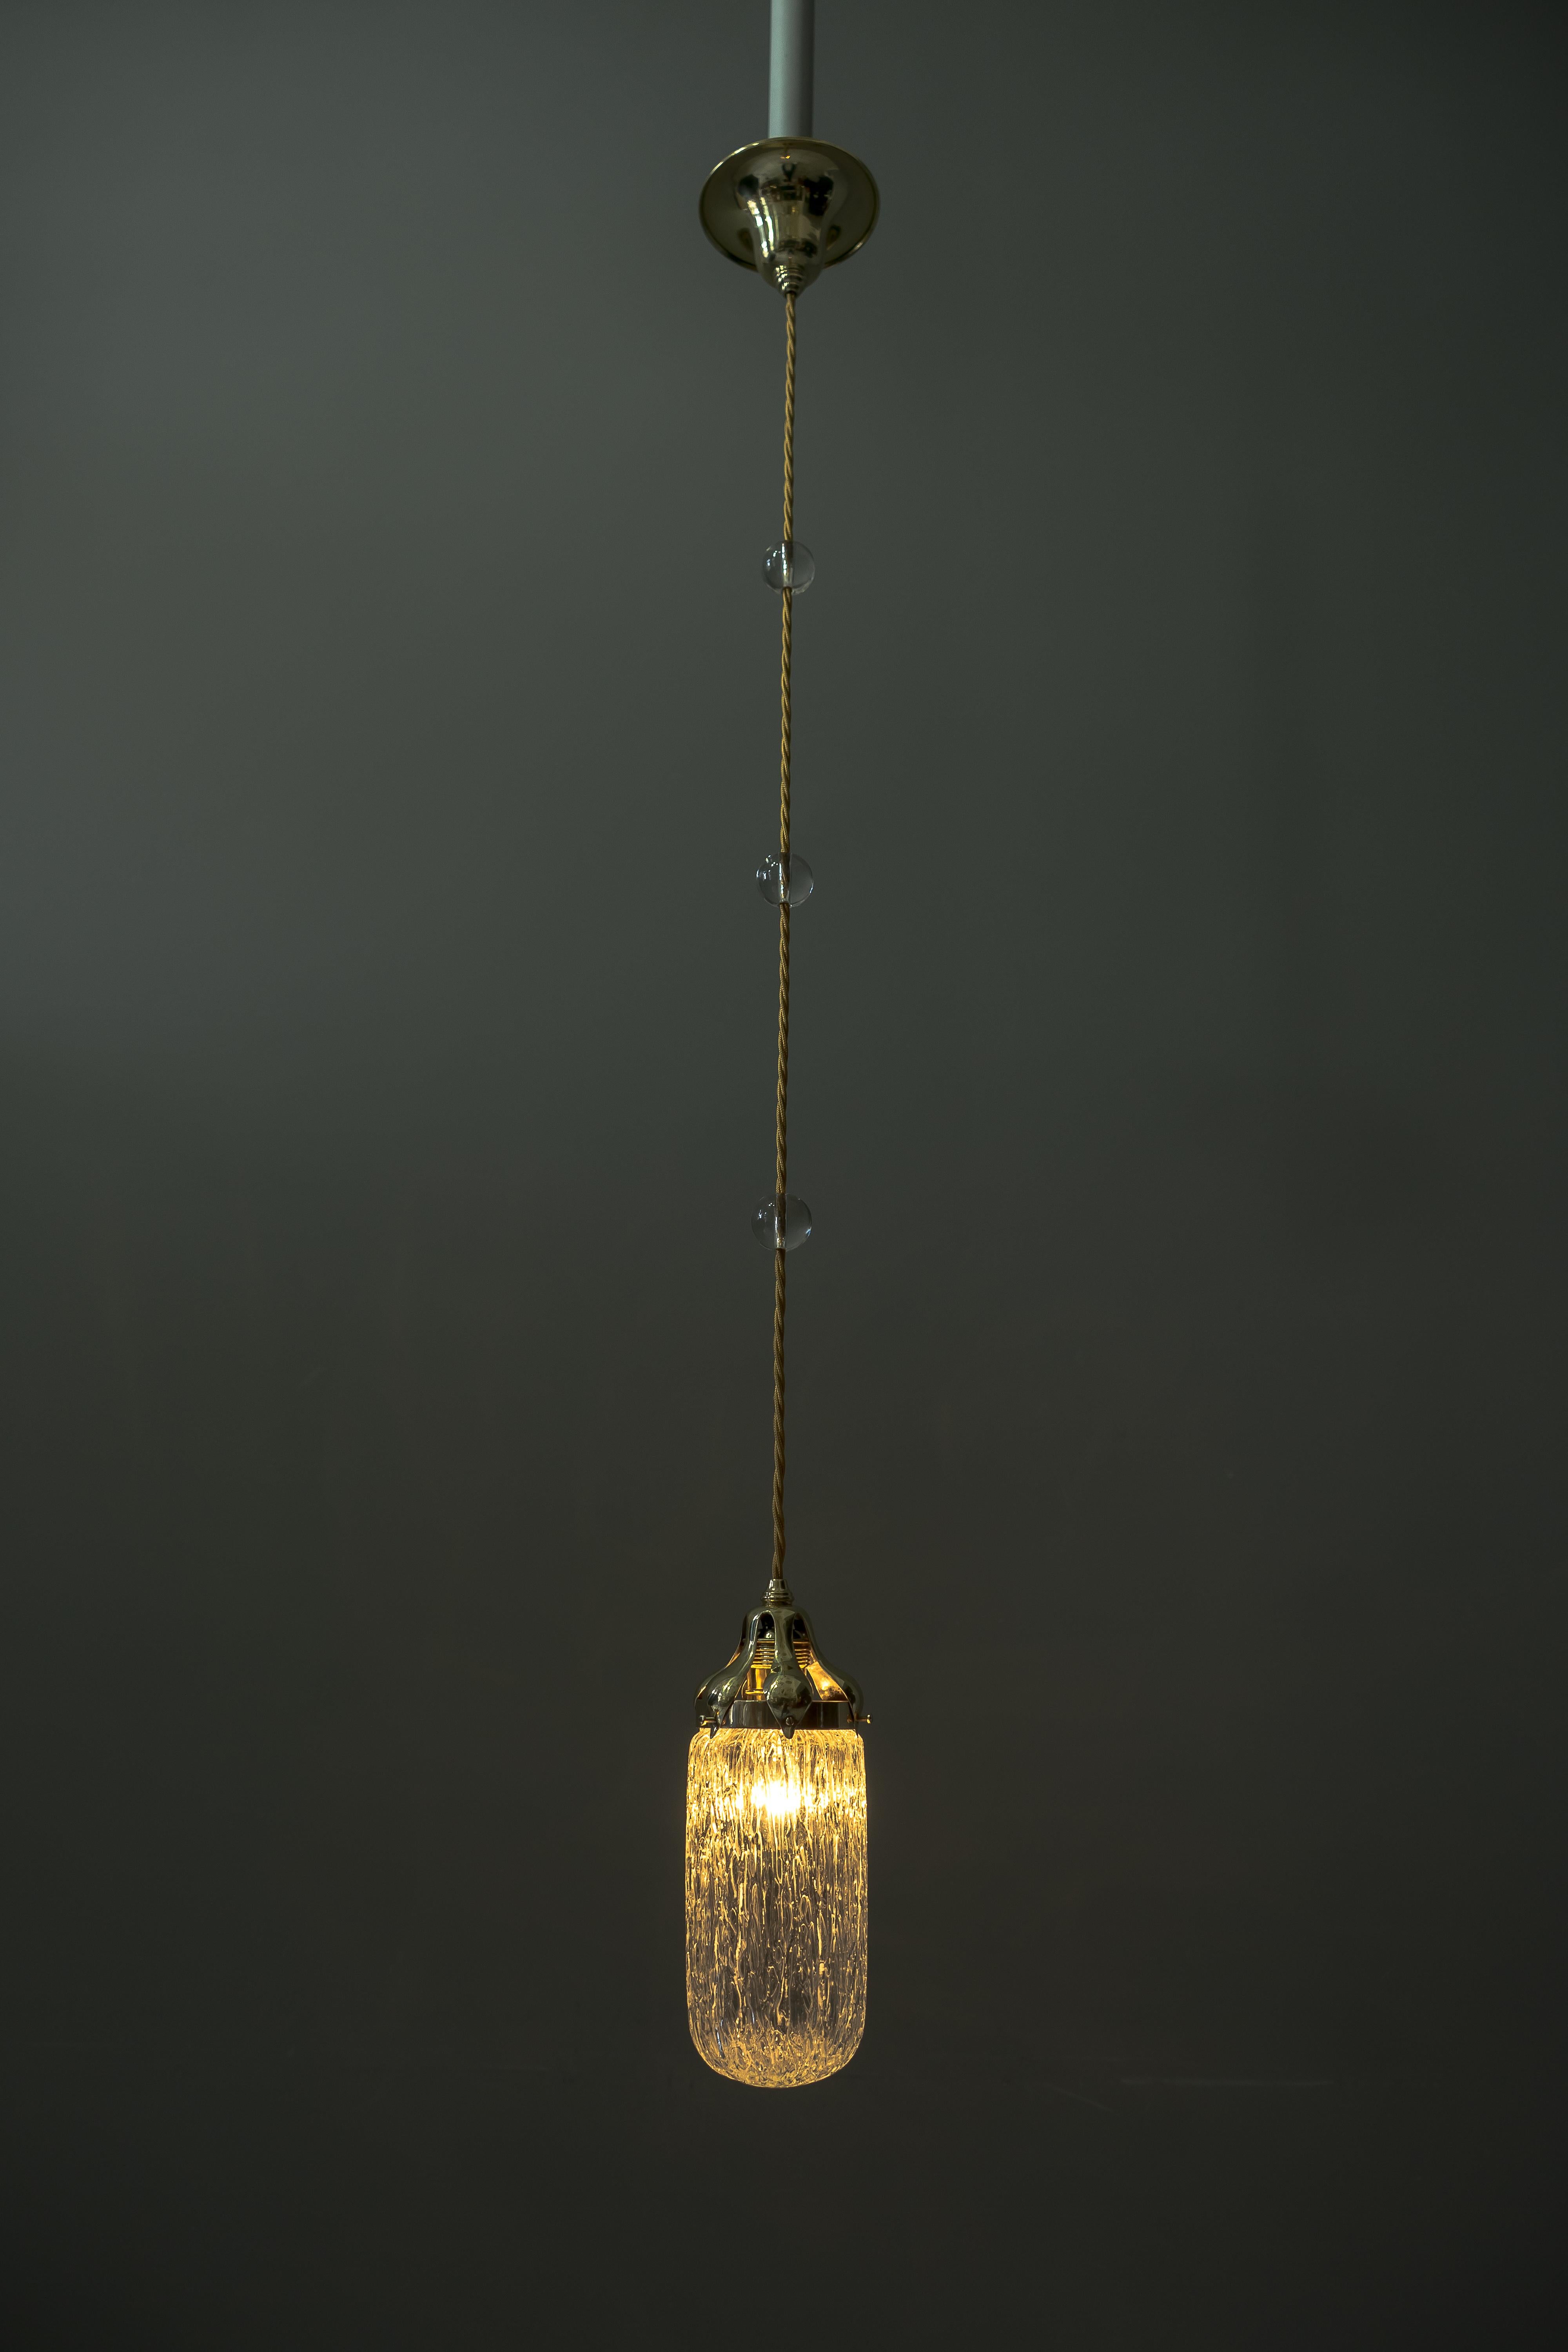 Brass Leopold Bauer Hanging Lamp with Loetz Witwe “Blitzglas” Shade, circa 1905 For Sale